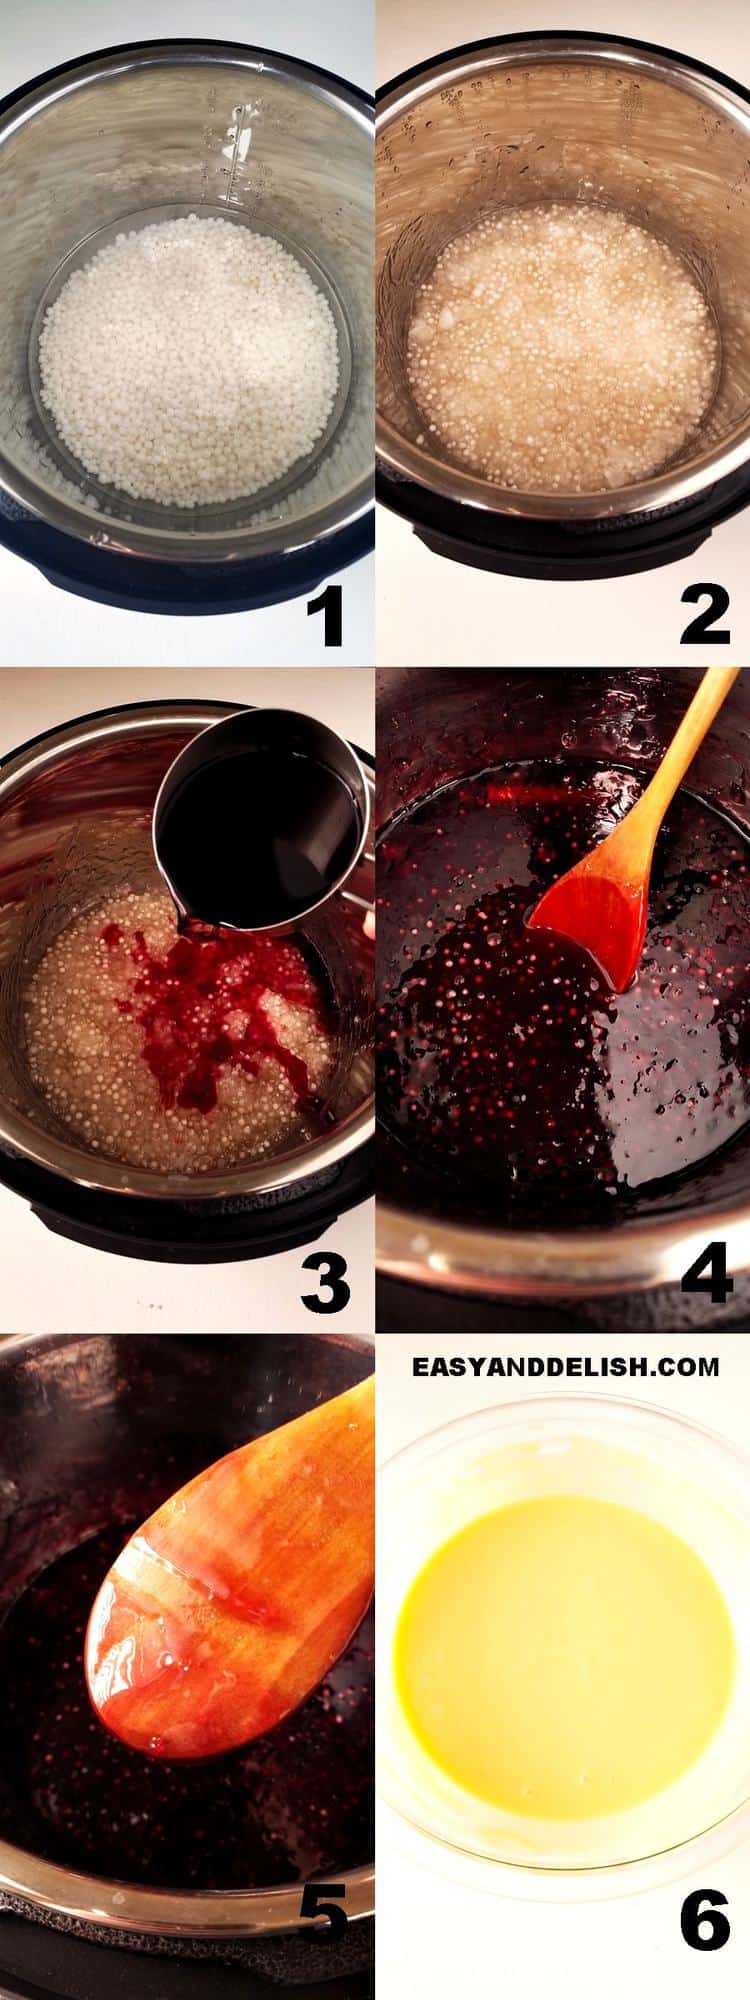 photo collage shpowing how to make red wine tapoioca pudding in the Instant Pot step-by-step 